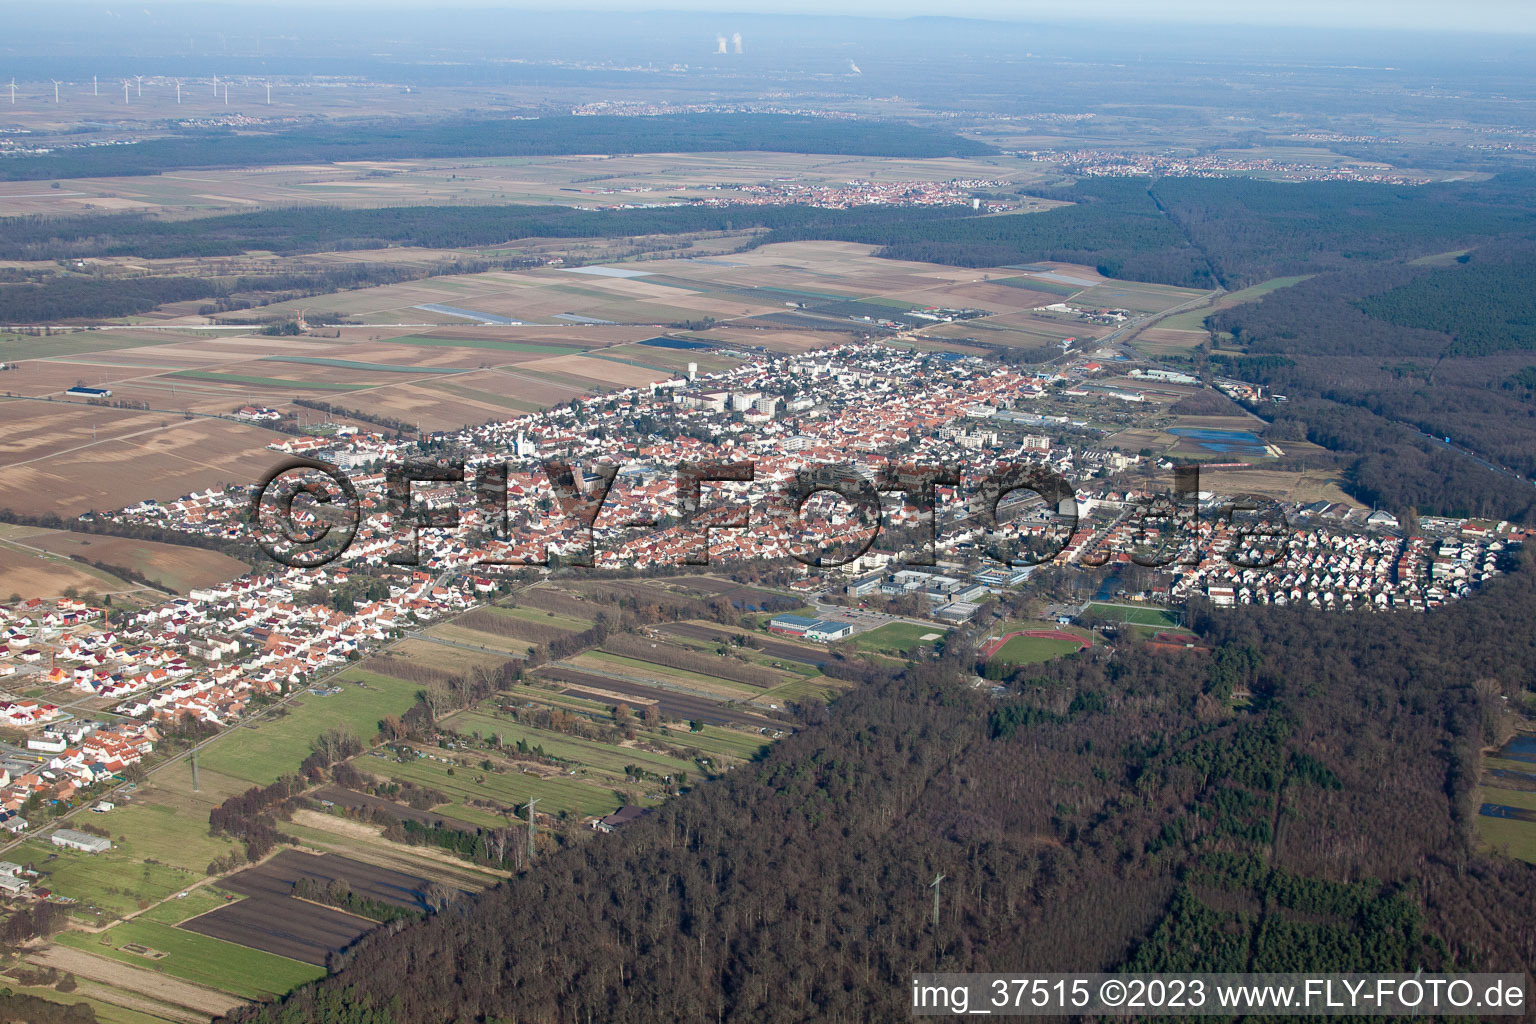 Drone image of Kandel in the state Rhineland-Palatinate, Germany